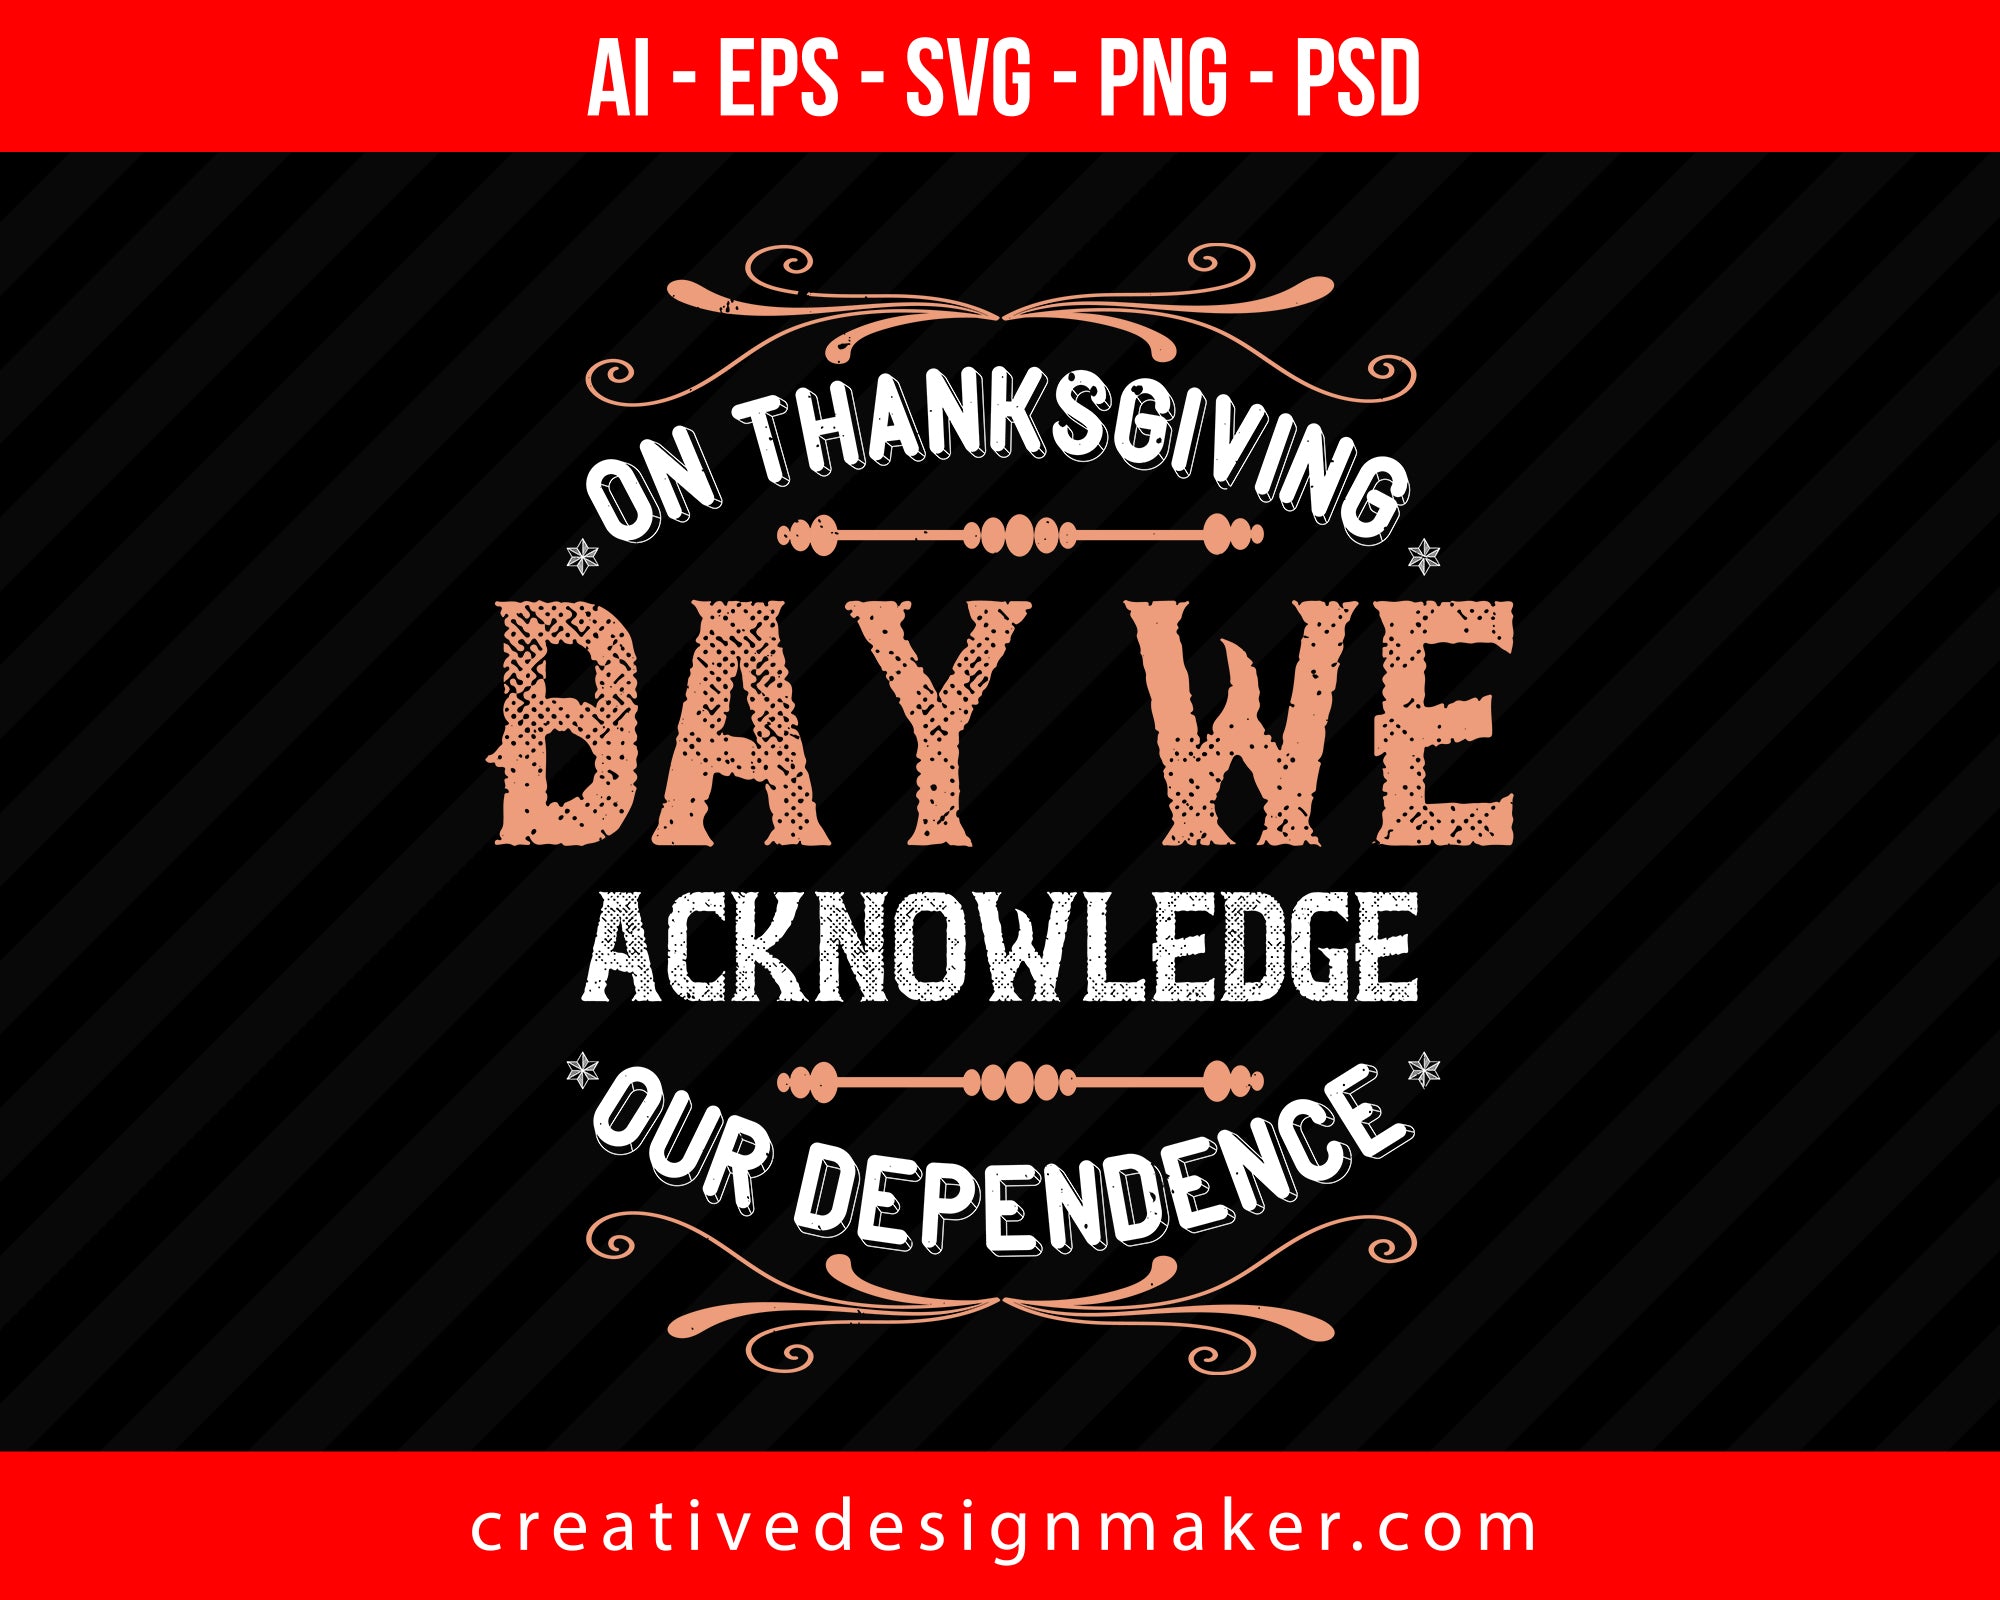 On Thanksgiving Day we acknowledge our dependence Print Ready Editable T-Shirt SVG Design!